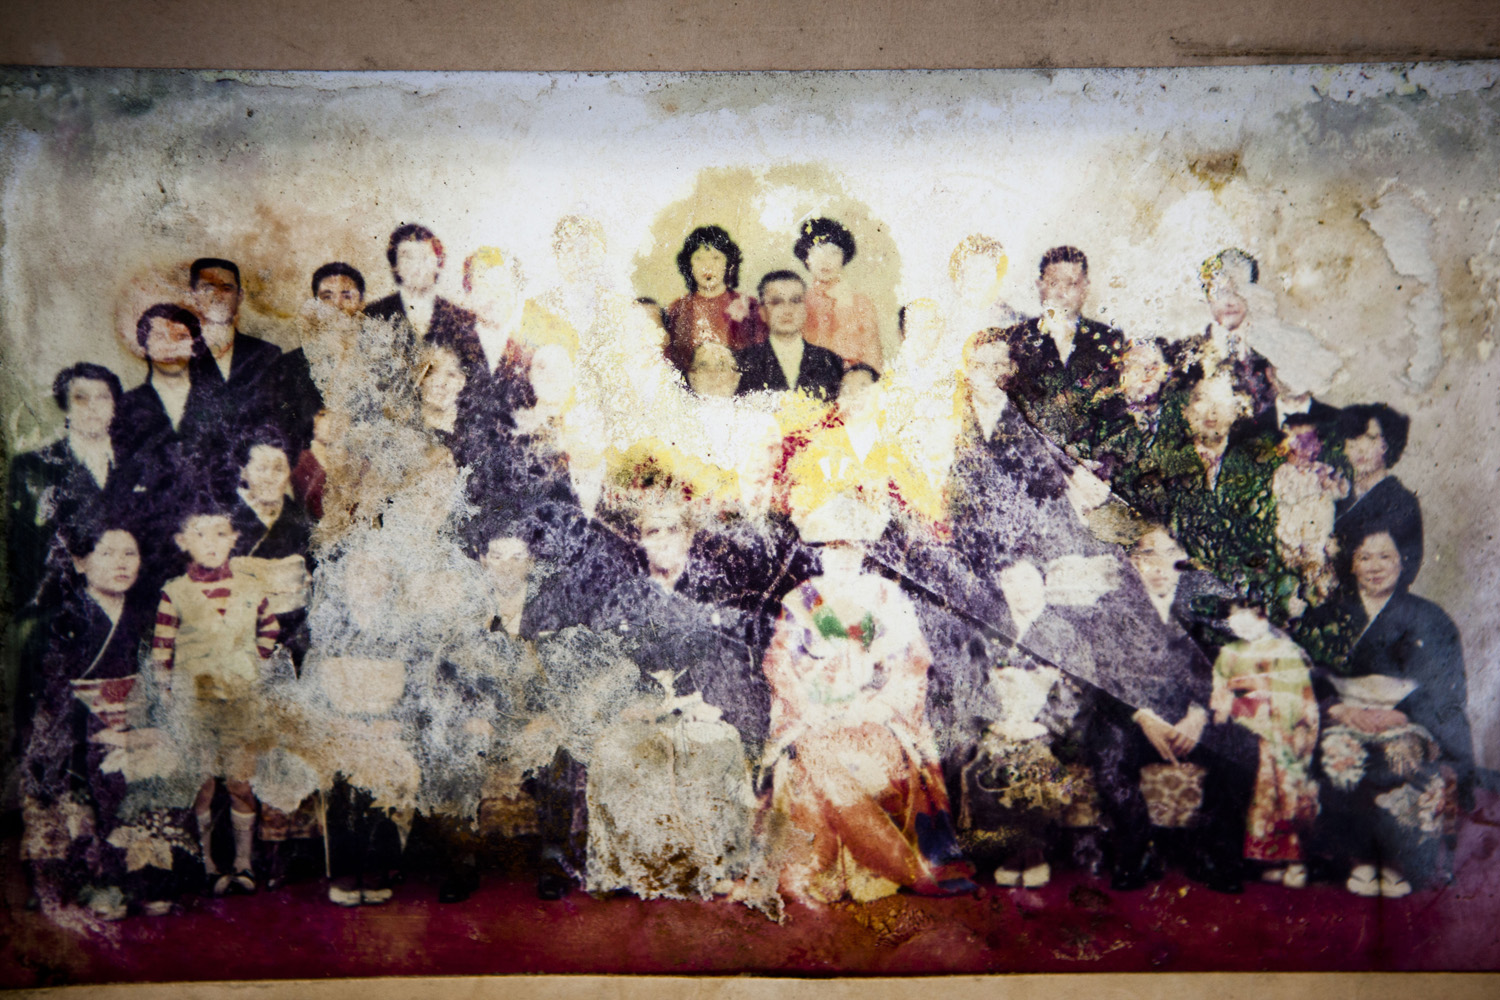 Japan, Minamisoma, 2012A photograph damaged by the Tsunami is kept in a gallery for family members to find again in downtown Minamisoma.